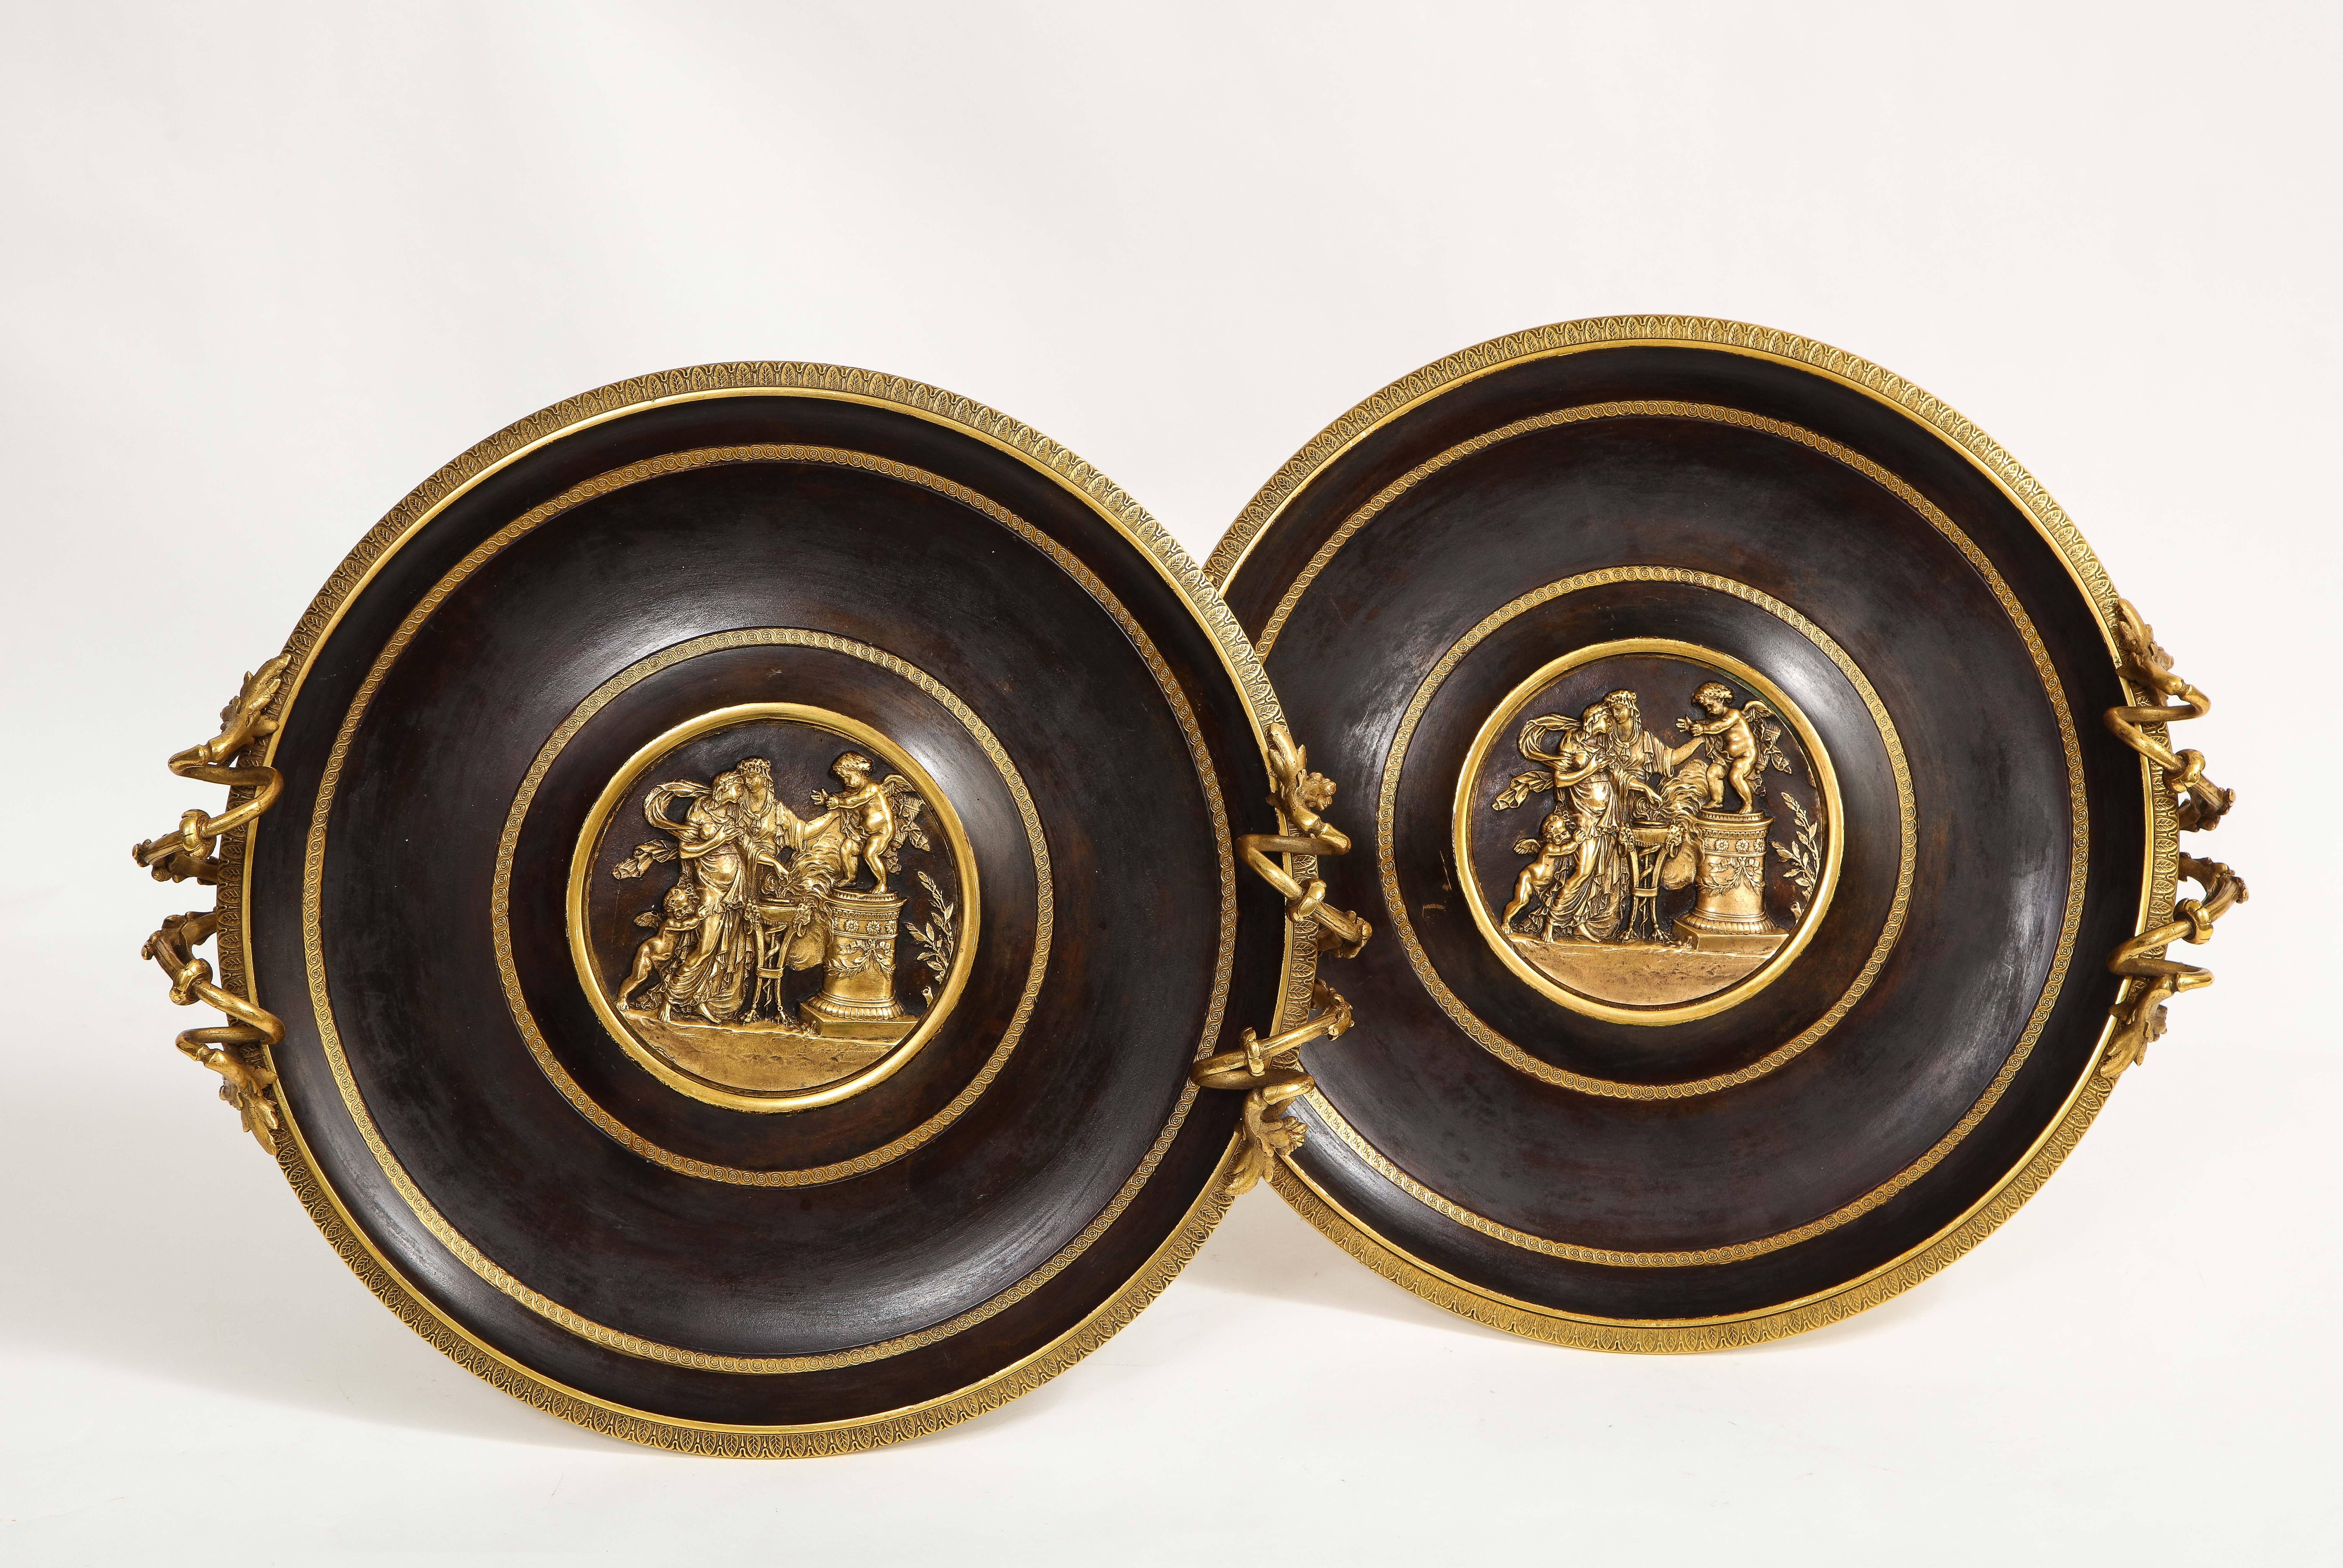 Pair of French 19th Century Dore and Patinated Bronze Handled Tazzas w/ Putti For Sale 9